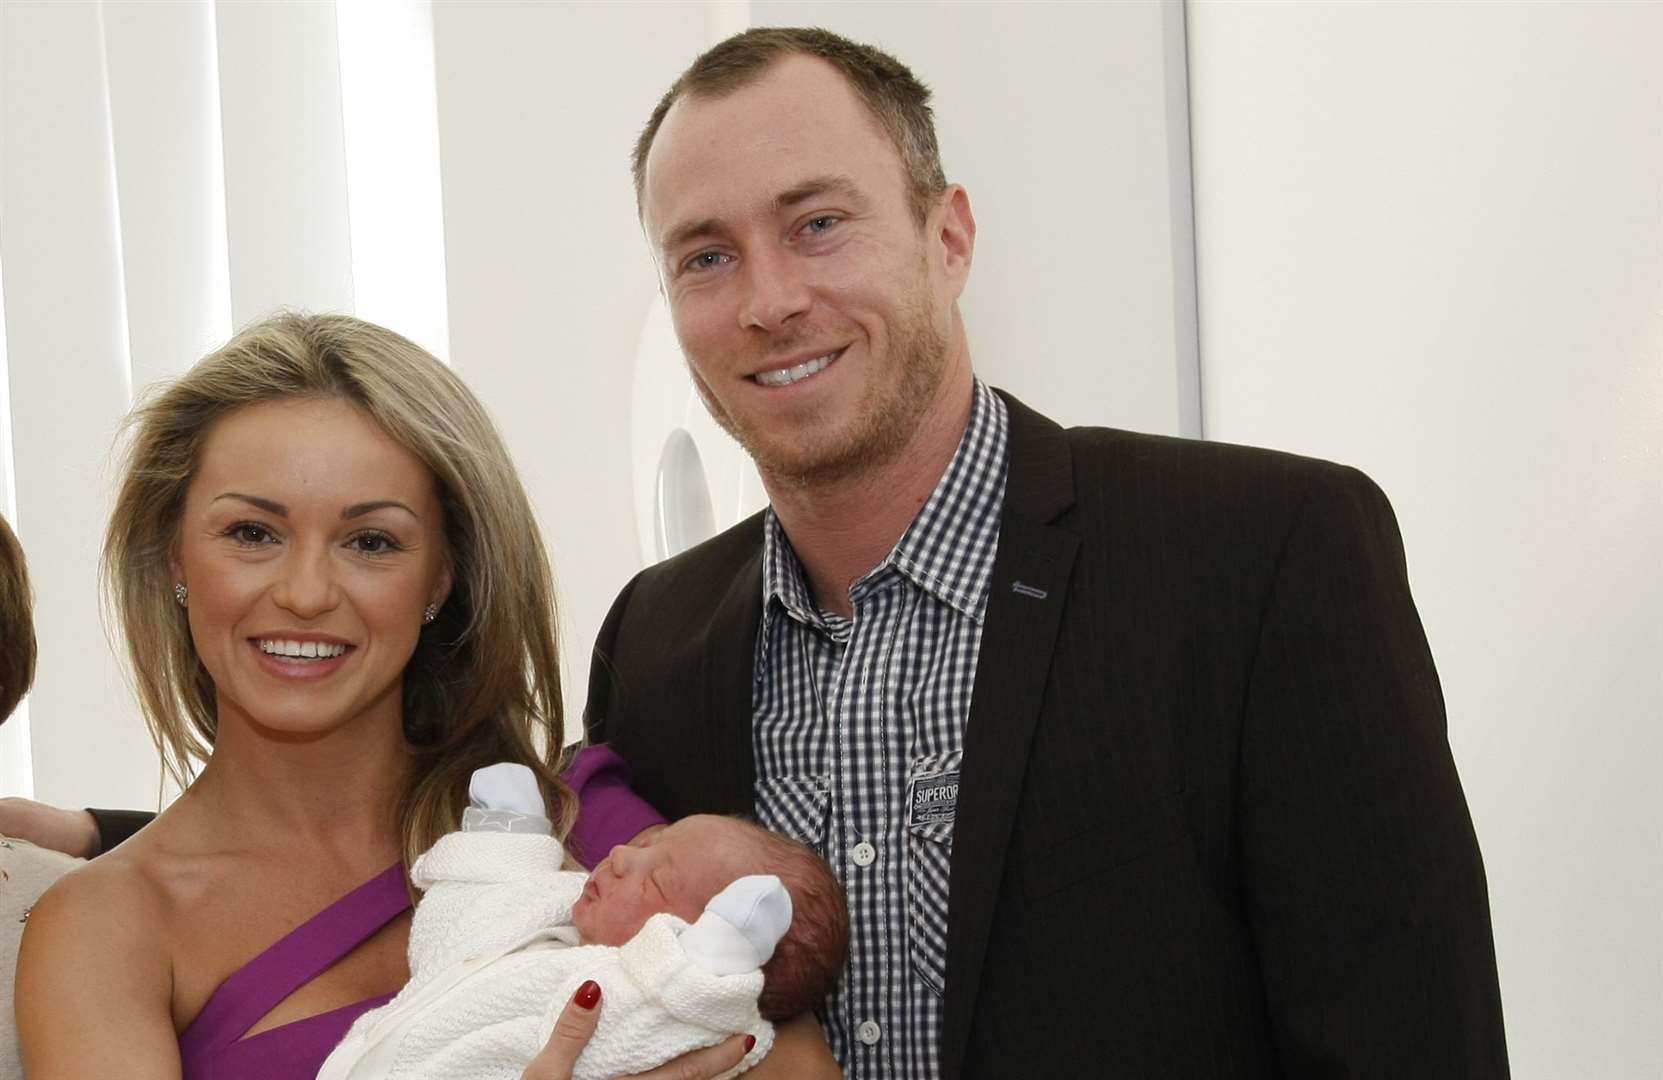 James and Ola Jordan opened The Birth Place maternity unit at Medway hospital